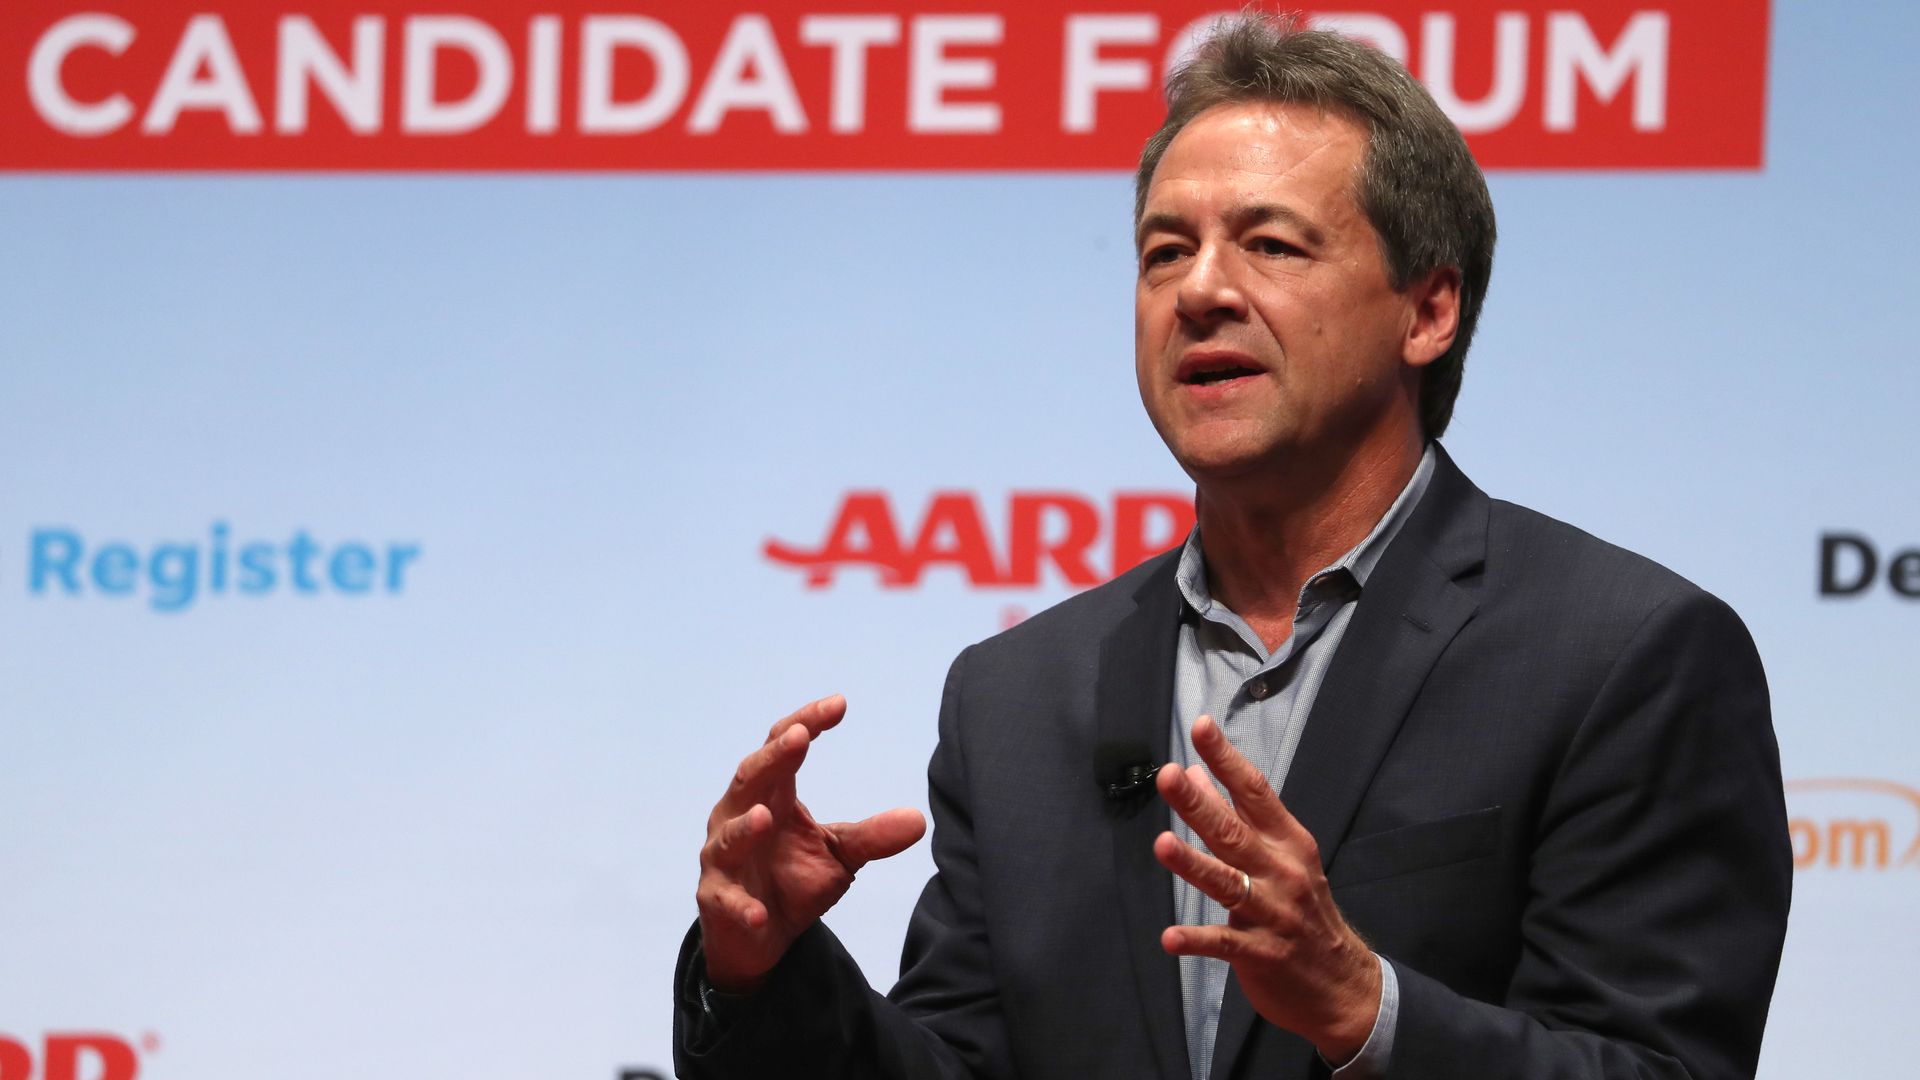 Democratic presidential hopeful Montana Gov. Steve Bullock speaks during the AARP and The Des Moines Register Iowa Presidential Candidate Forum on July 20